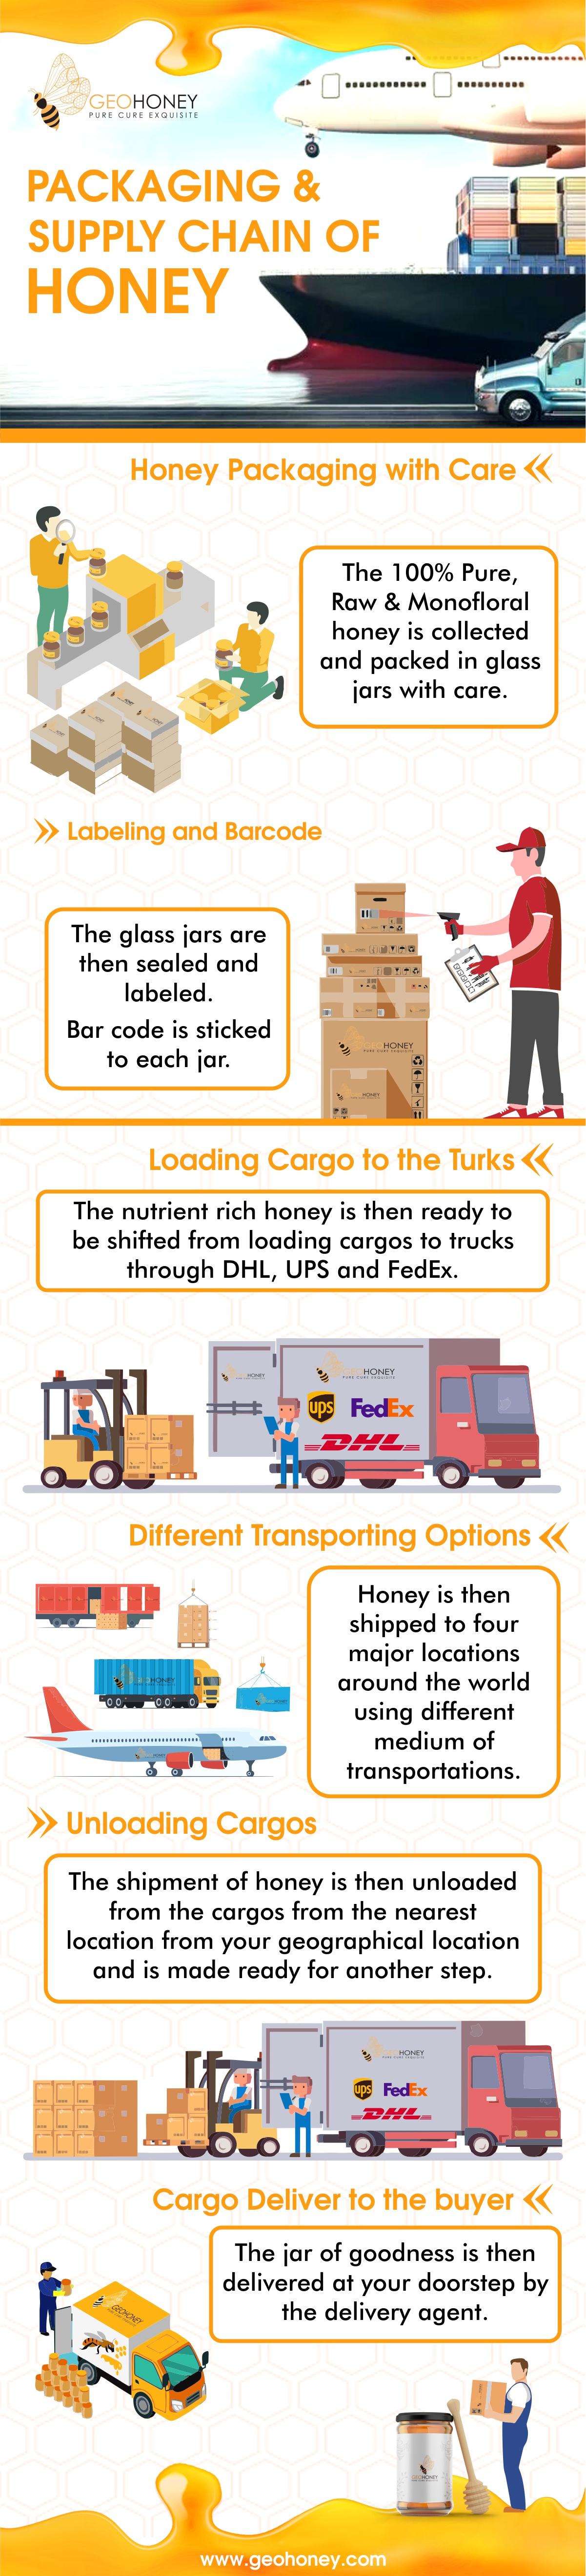 Packaging & supply chain of honey